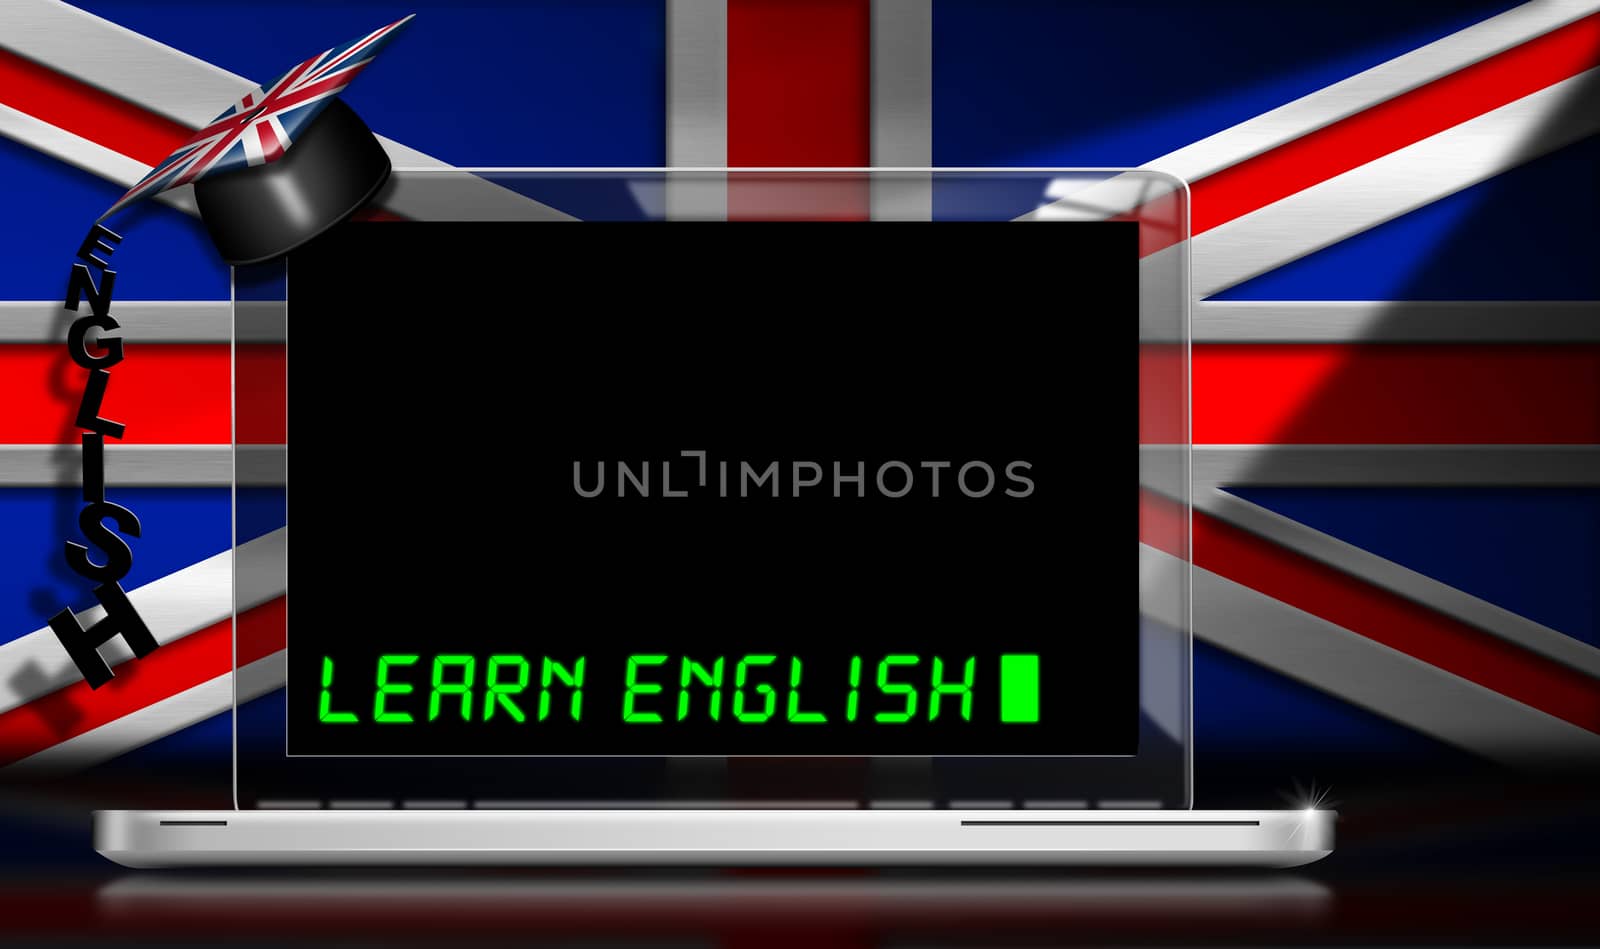 Learn English - Laptop Computer by catalby